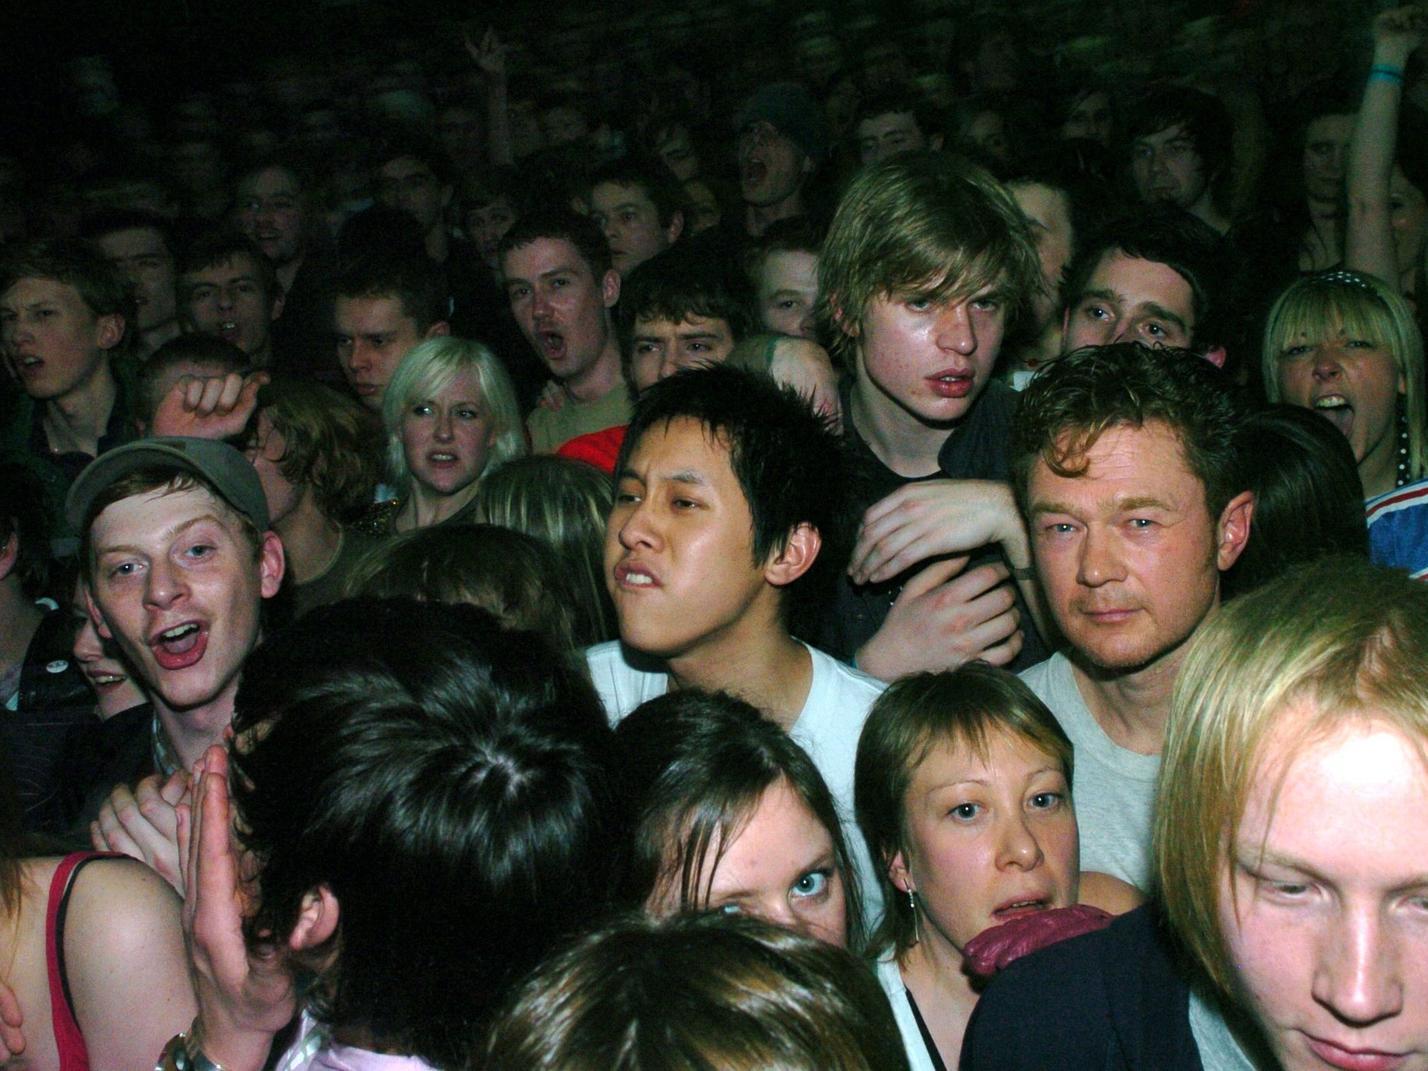 Were you among the crowd when the Pete Doherty gig was cancelled? When: 25 January 2006